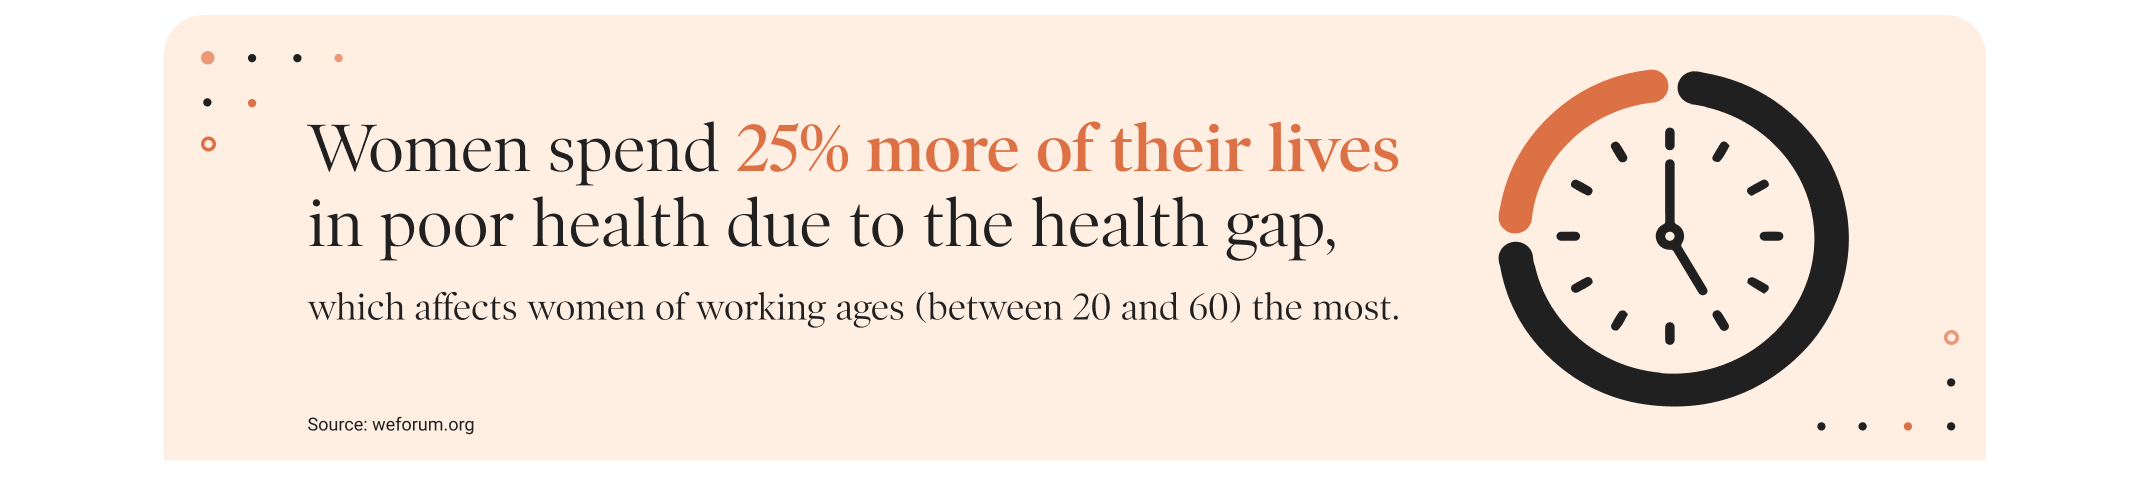 Women spend 25% more of their lives in poor health due to the health gap, which affects women of working ages (between 20 and 60) the most.